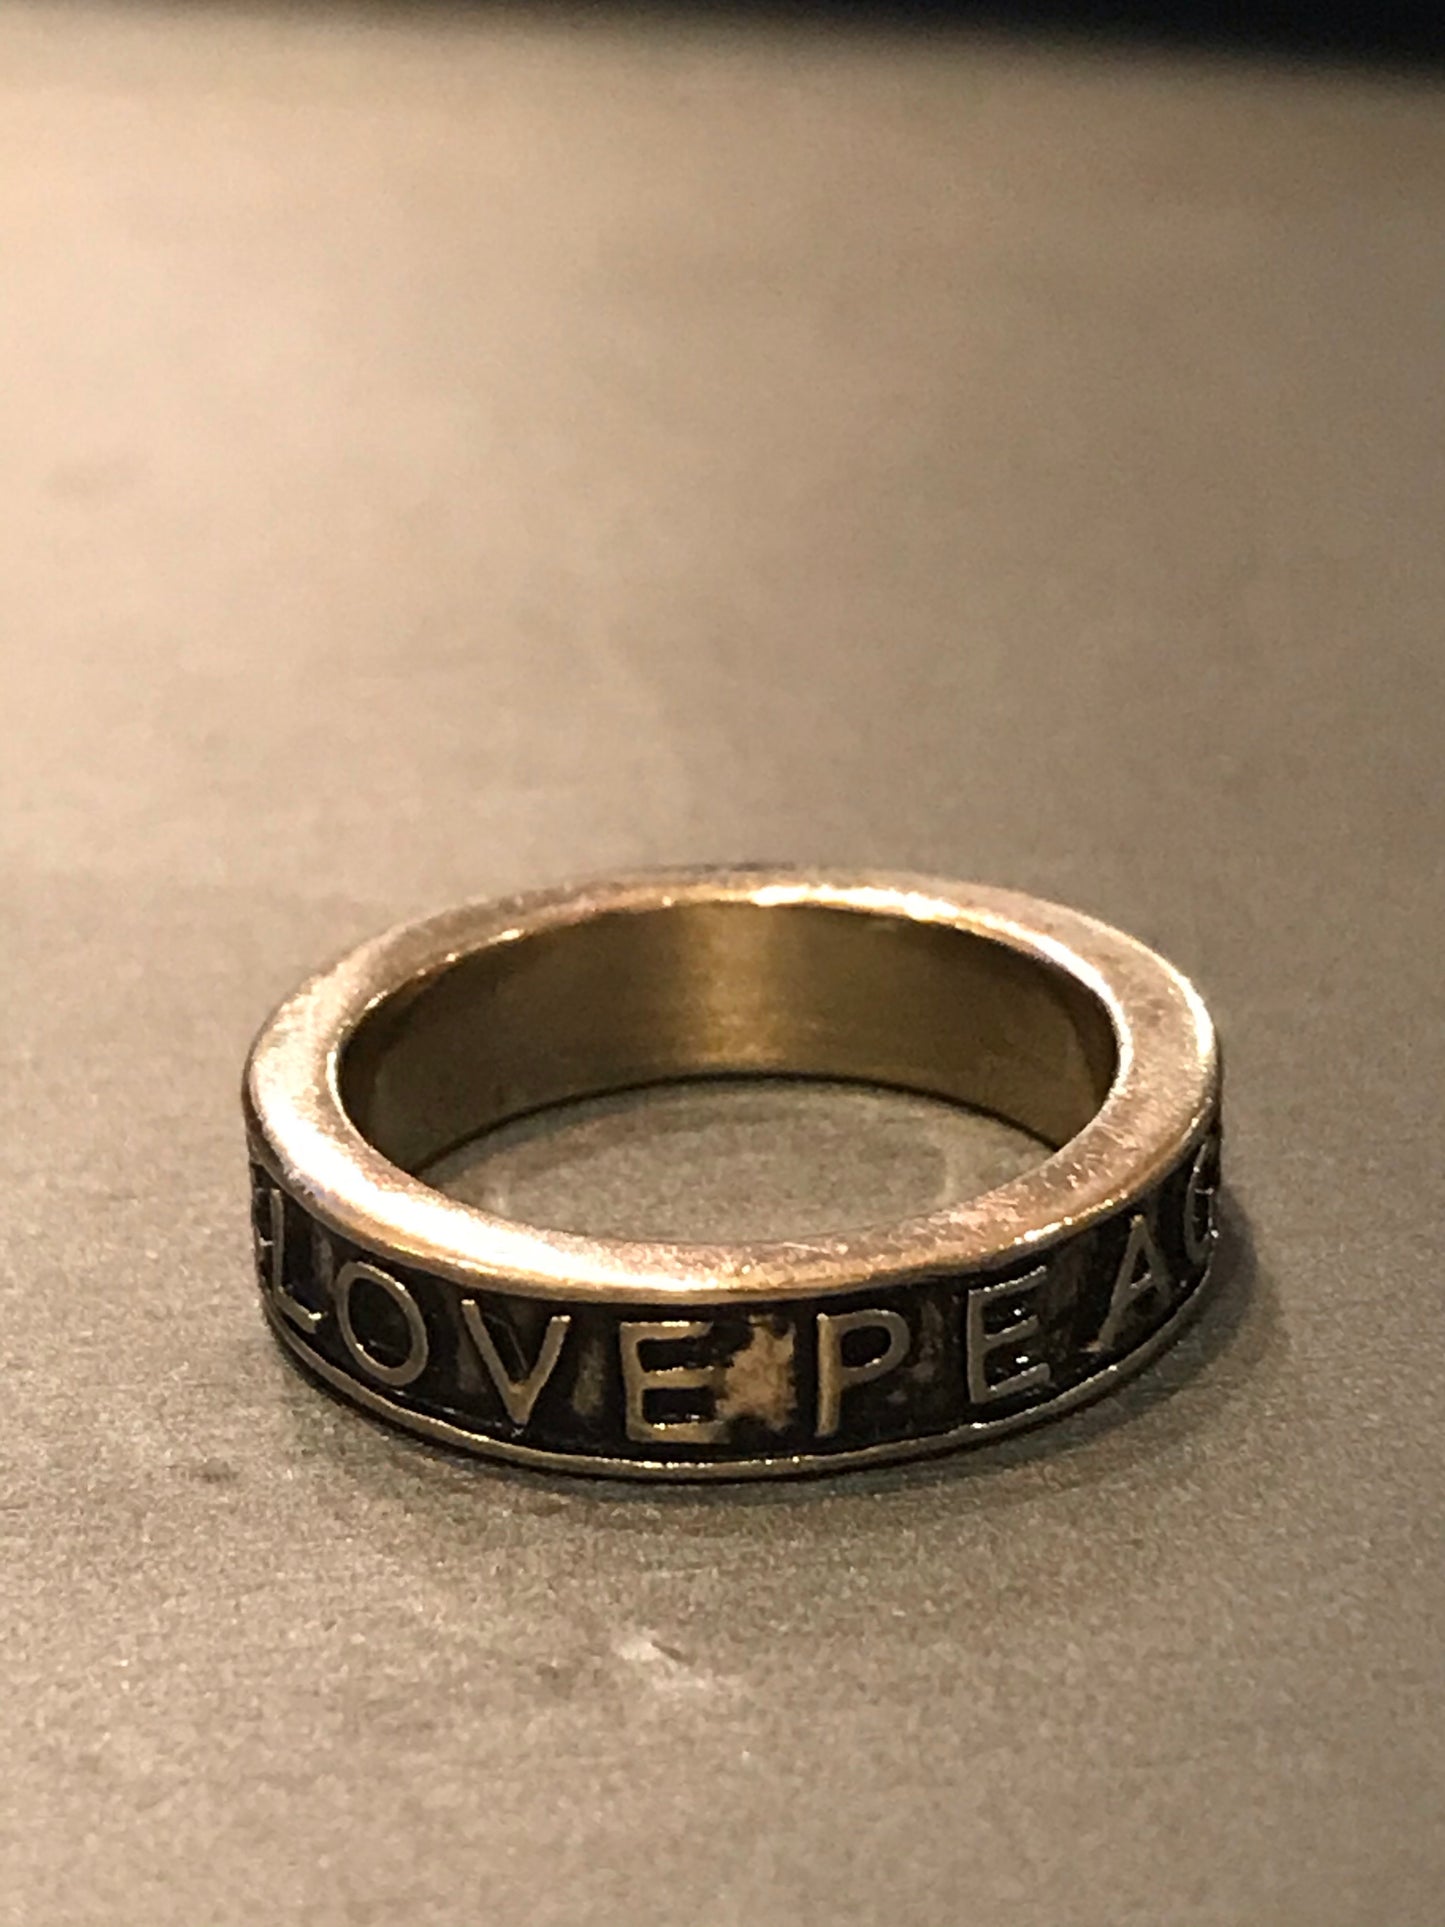 Vintage Love and Peace Ring